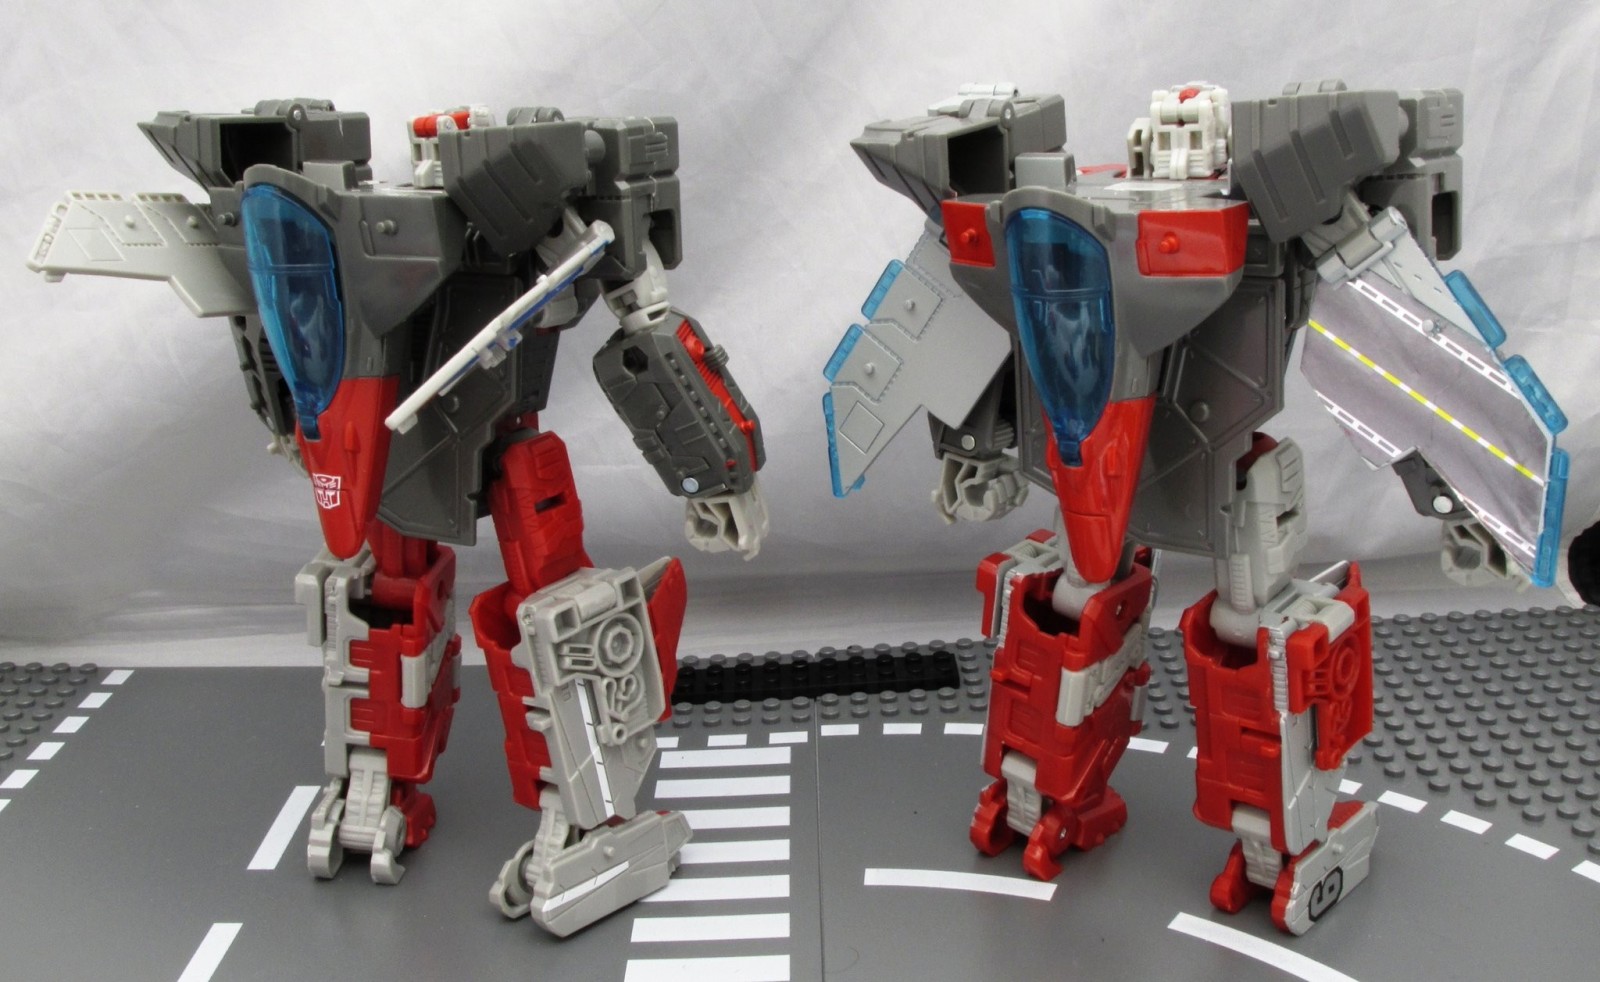 Transformers News: In-Hand Images and Comparisons of Takara Tomy Transformers Legends LG-53 Broadside